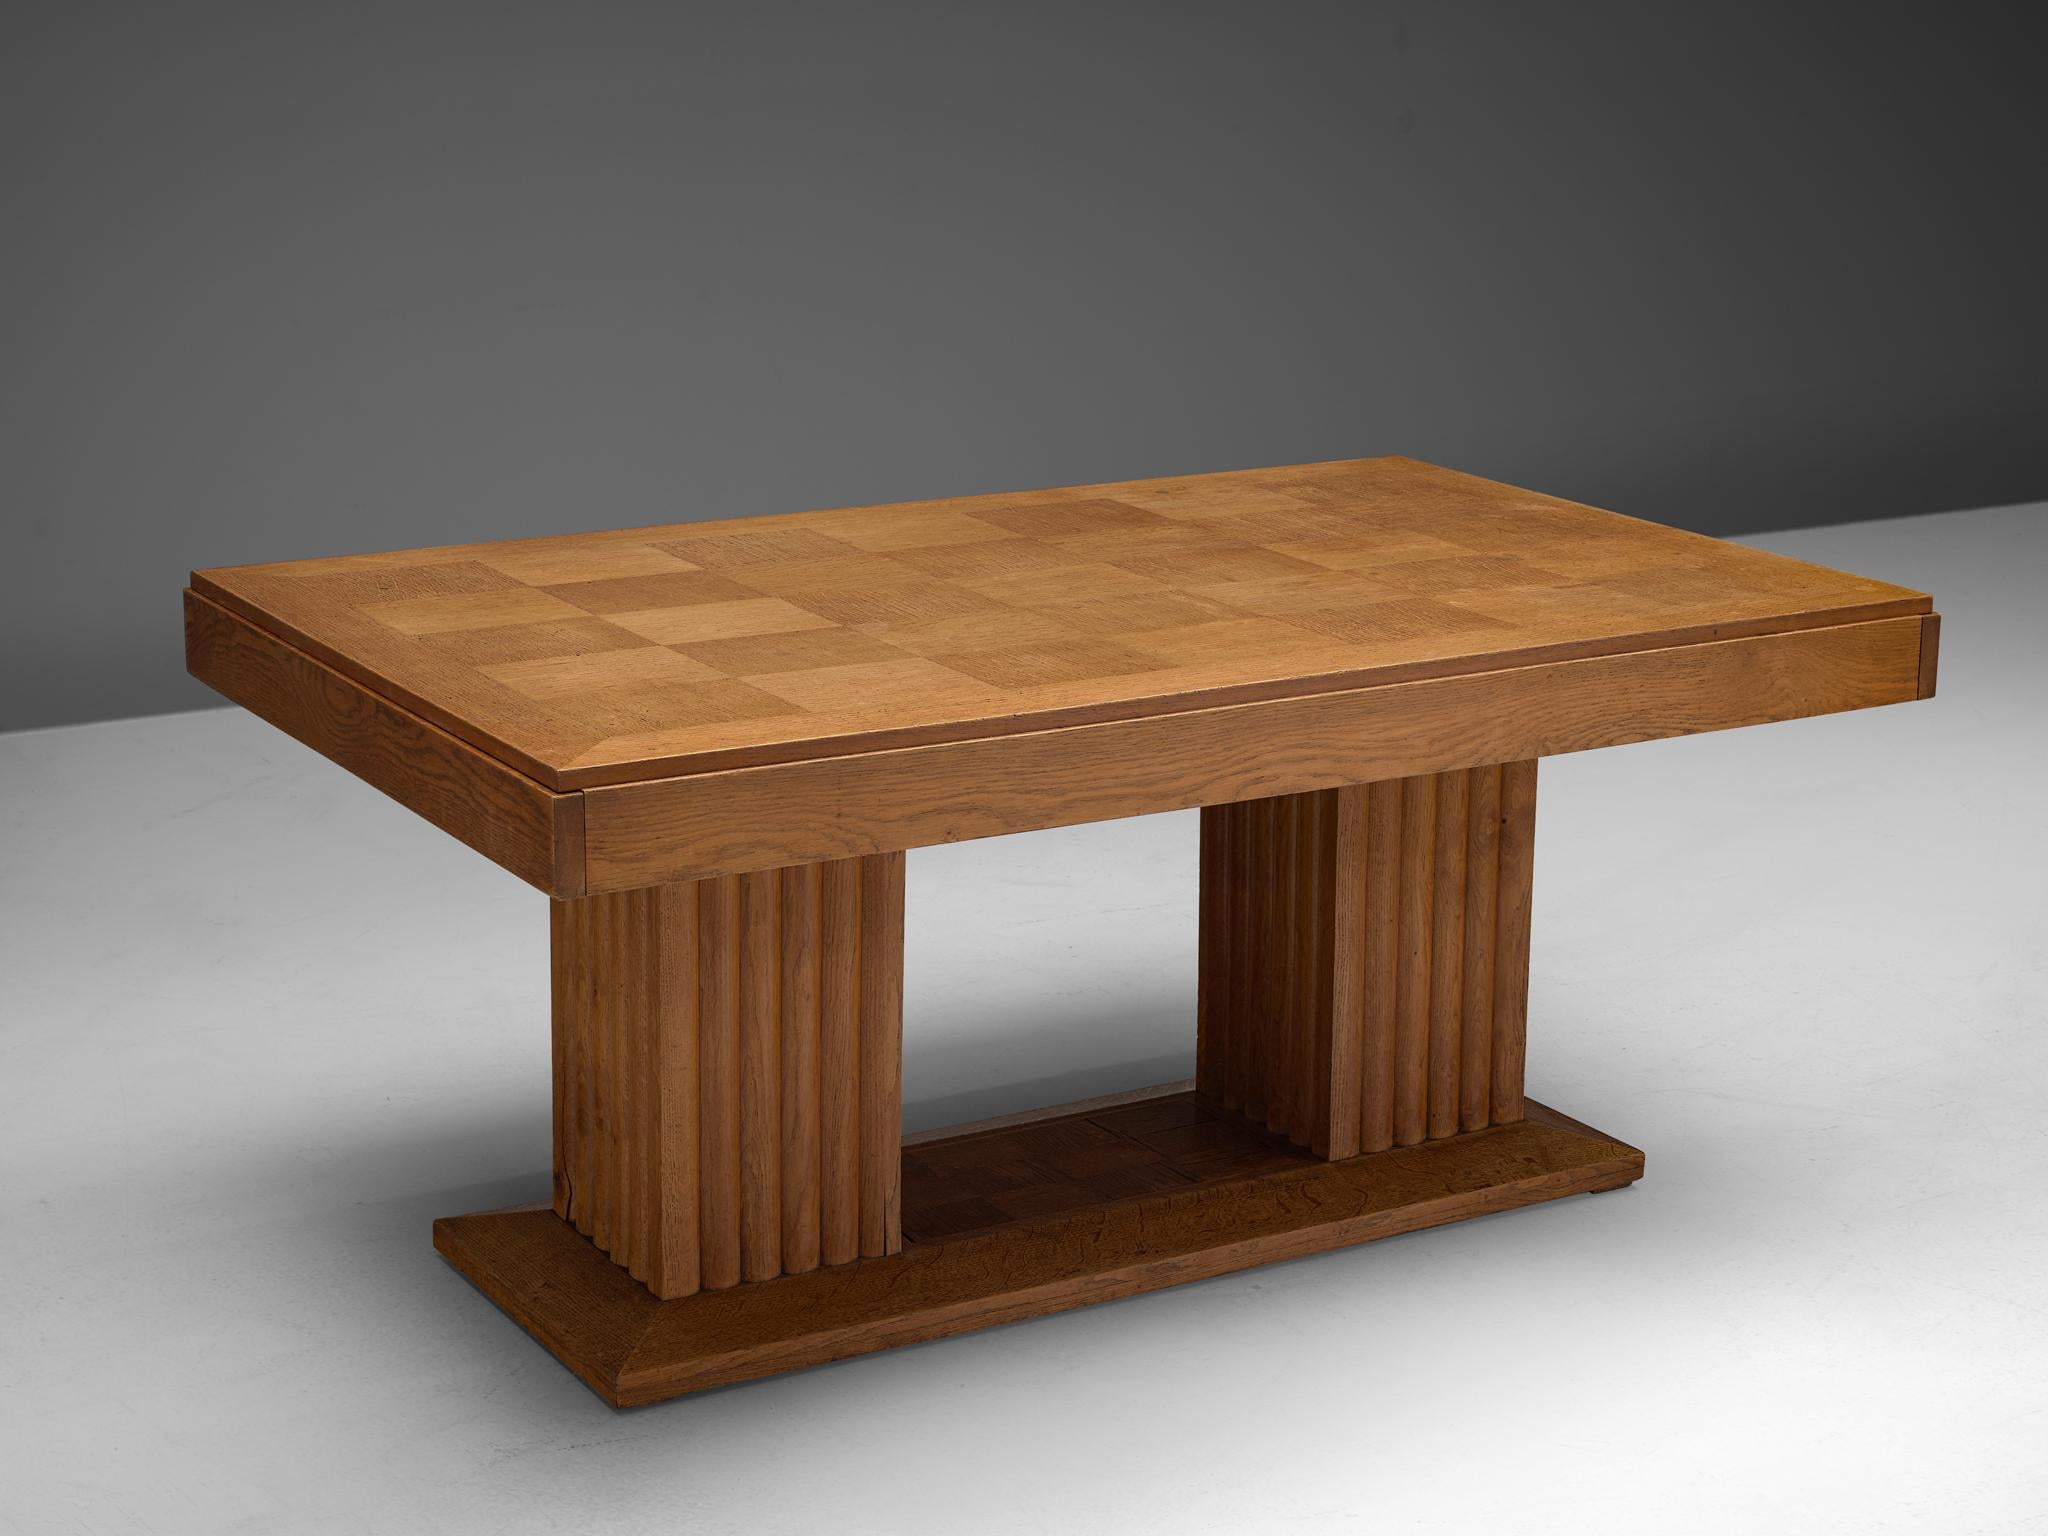 Christian Krass, dining table, oak, France, 1930s.

This custom made large Art Deco table is made by Christian Krass. It has been executed with a very detailed wooden inlay on top. It shows great craftsmanship, as can be seen in the two solid bases,